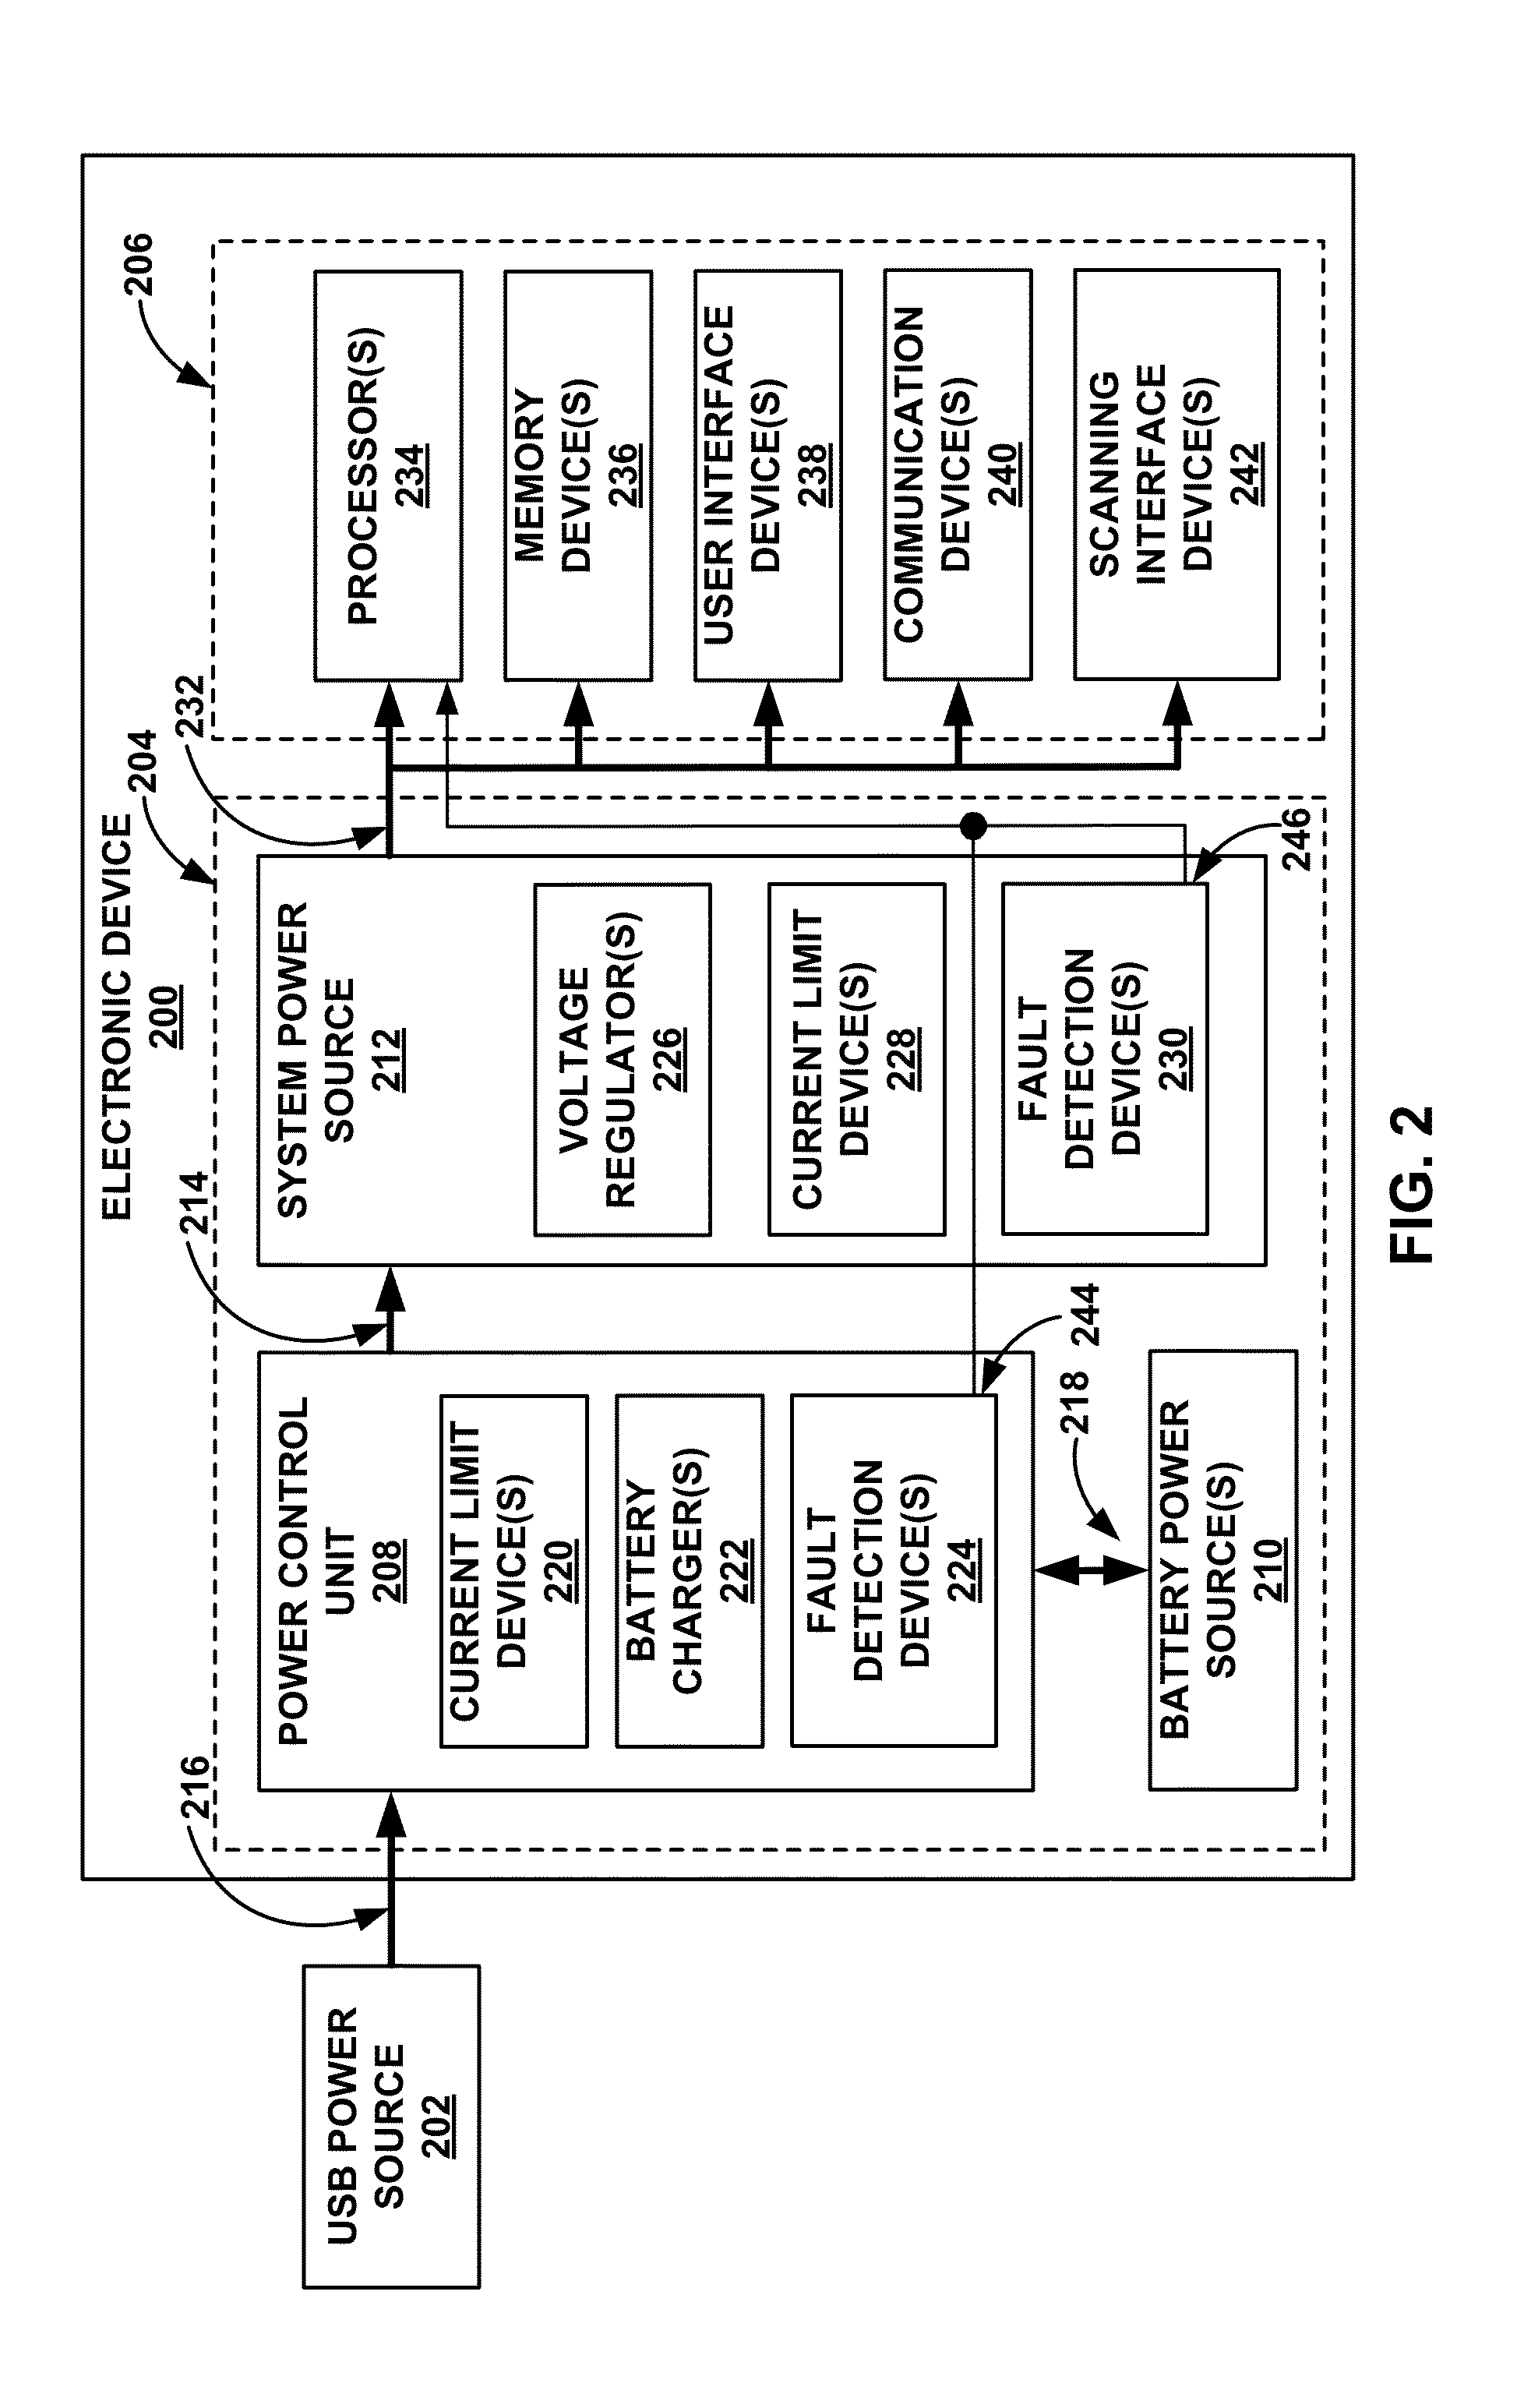 Current-limiting battery usage within a corded electronic device